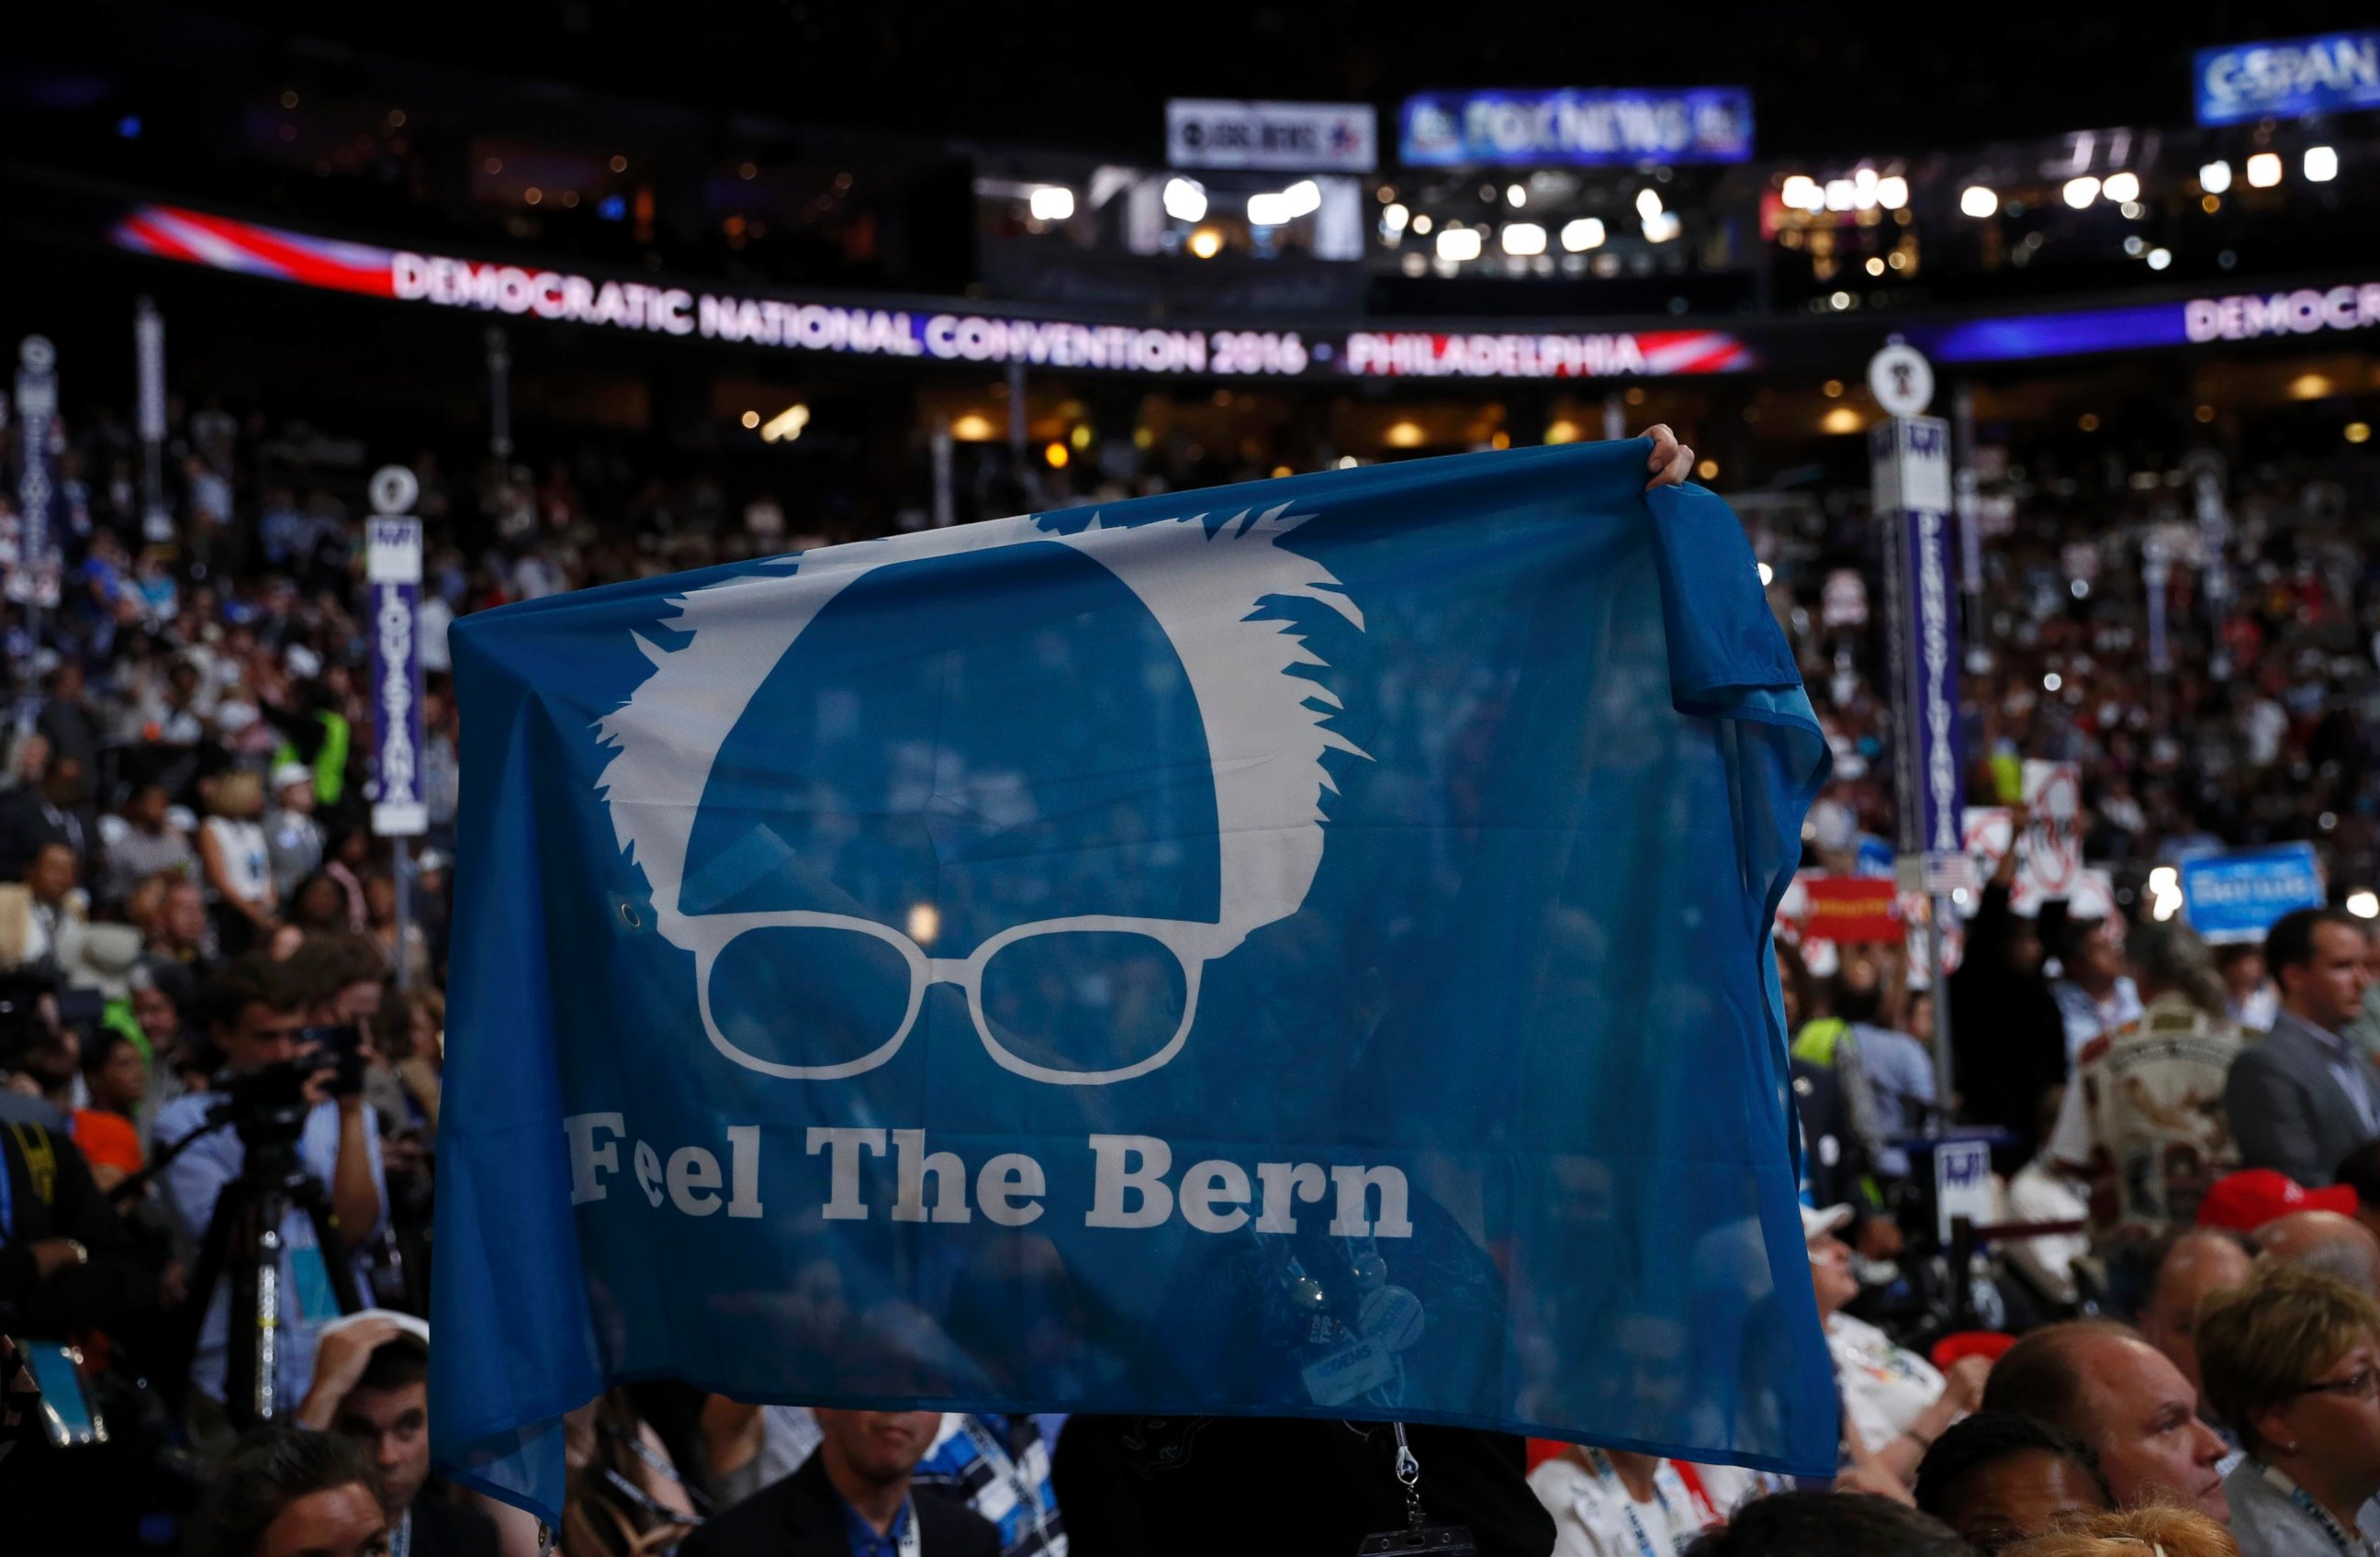 PHOTO: Supporters of Senator Bernie Sanders hold up a "Feel the Bern" banner as they protest on the floor during the first day of the Democratic National Convention in Philadelphia, July 25, 2016.